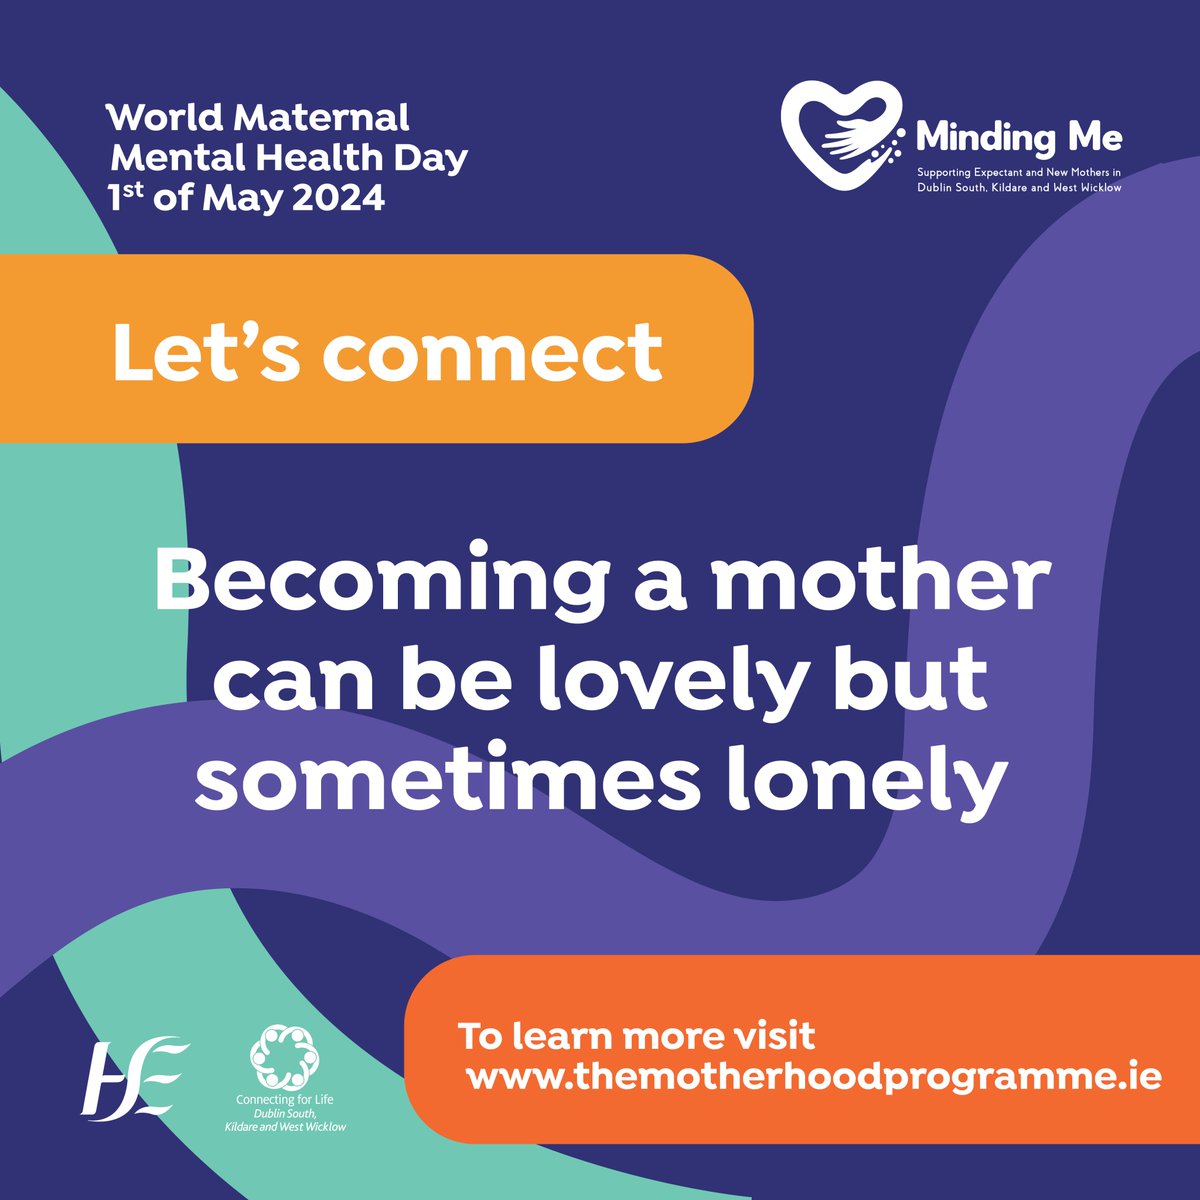 Motherhood is a journey filled with love, but at times can be isolating. Join our campaign to combat loneliness in motherhood and help create a supportive community where every mum feels connected. Visit themotherhoodprogramme.ie #maternalmentalhealthmatters #mindingmeDSKWW